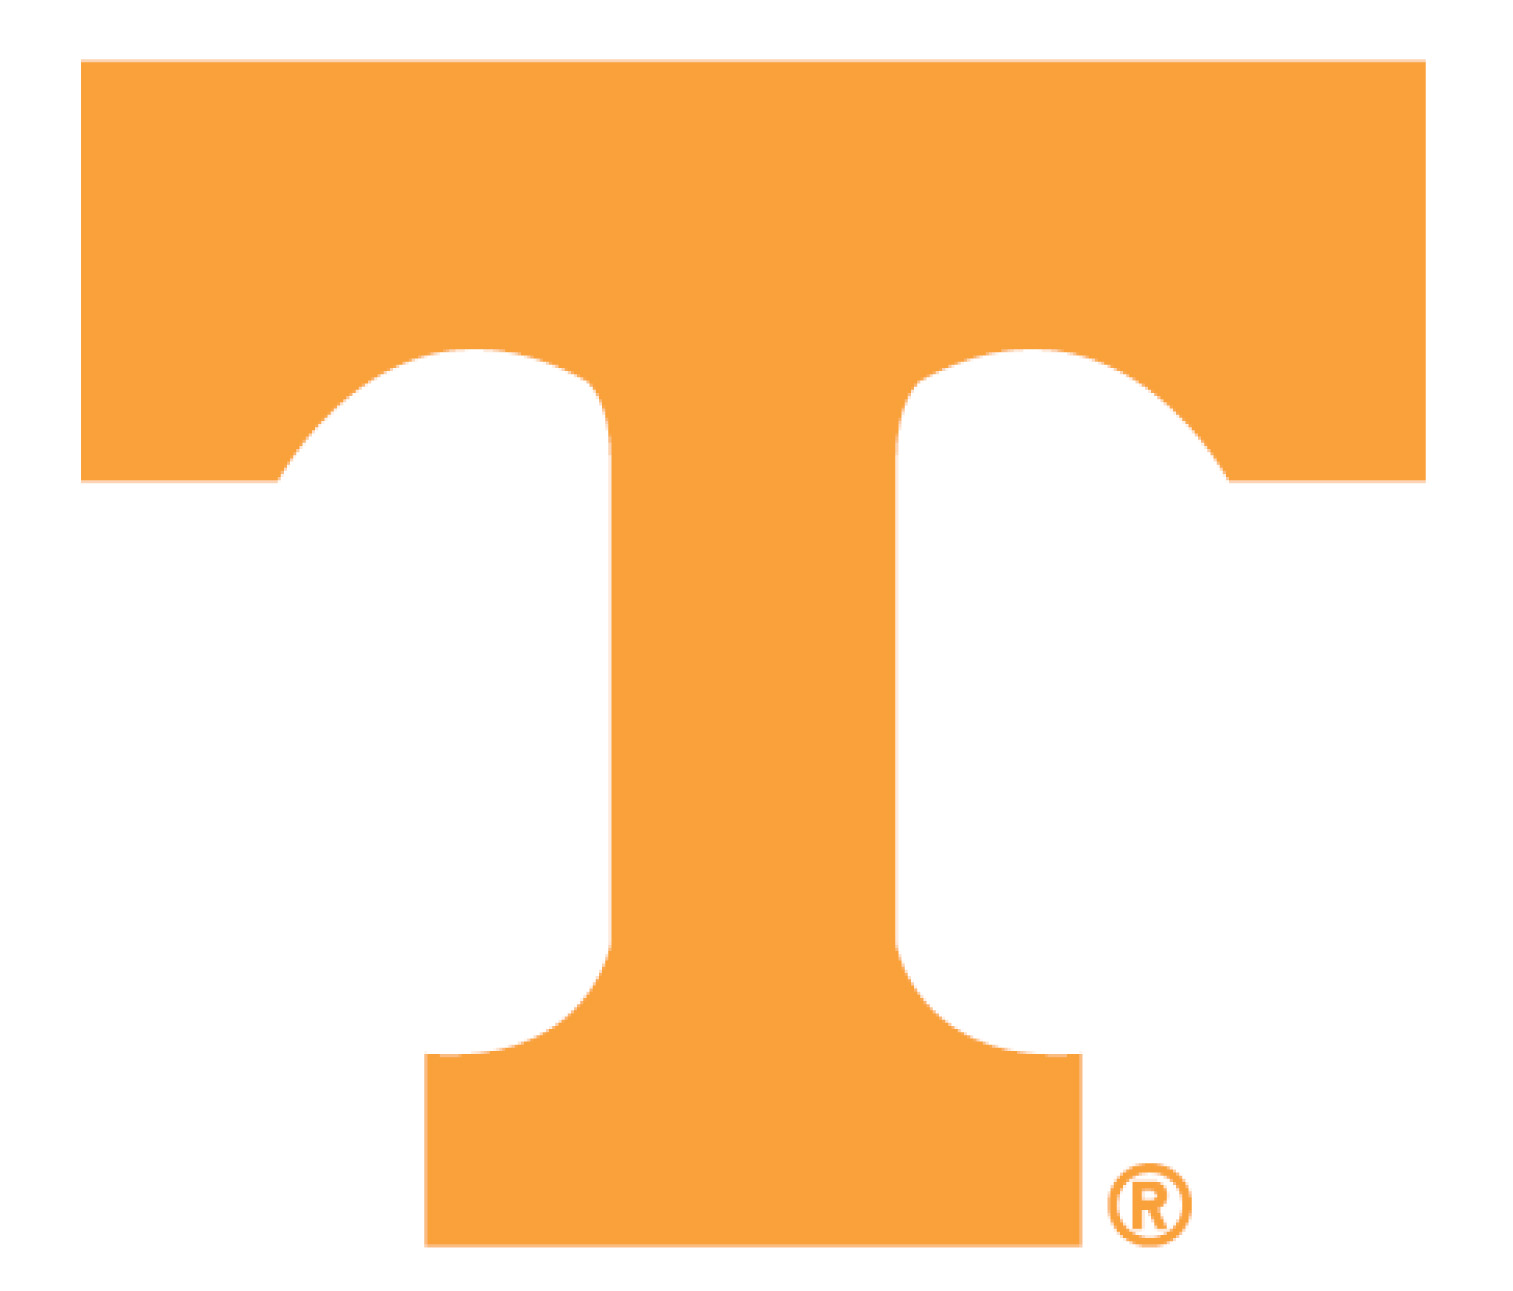 University Of Tennessee Basketball Team Clipart   Free Clip Art Images